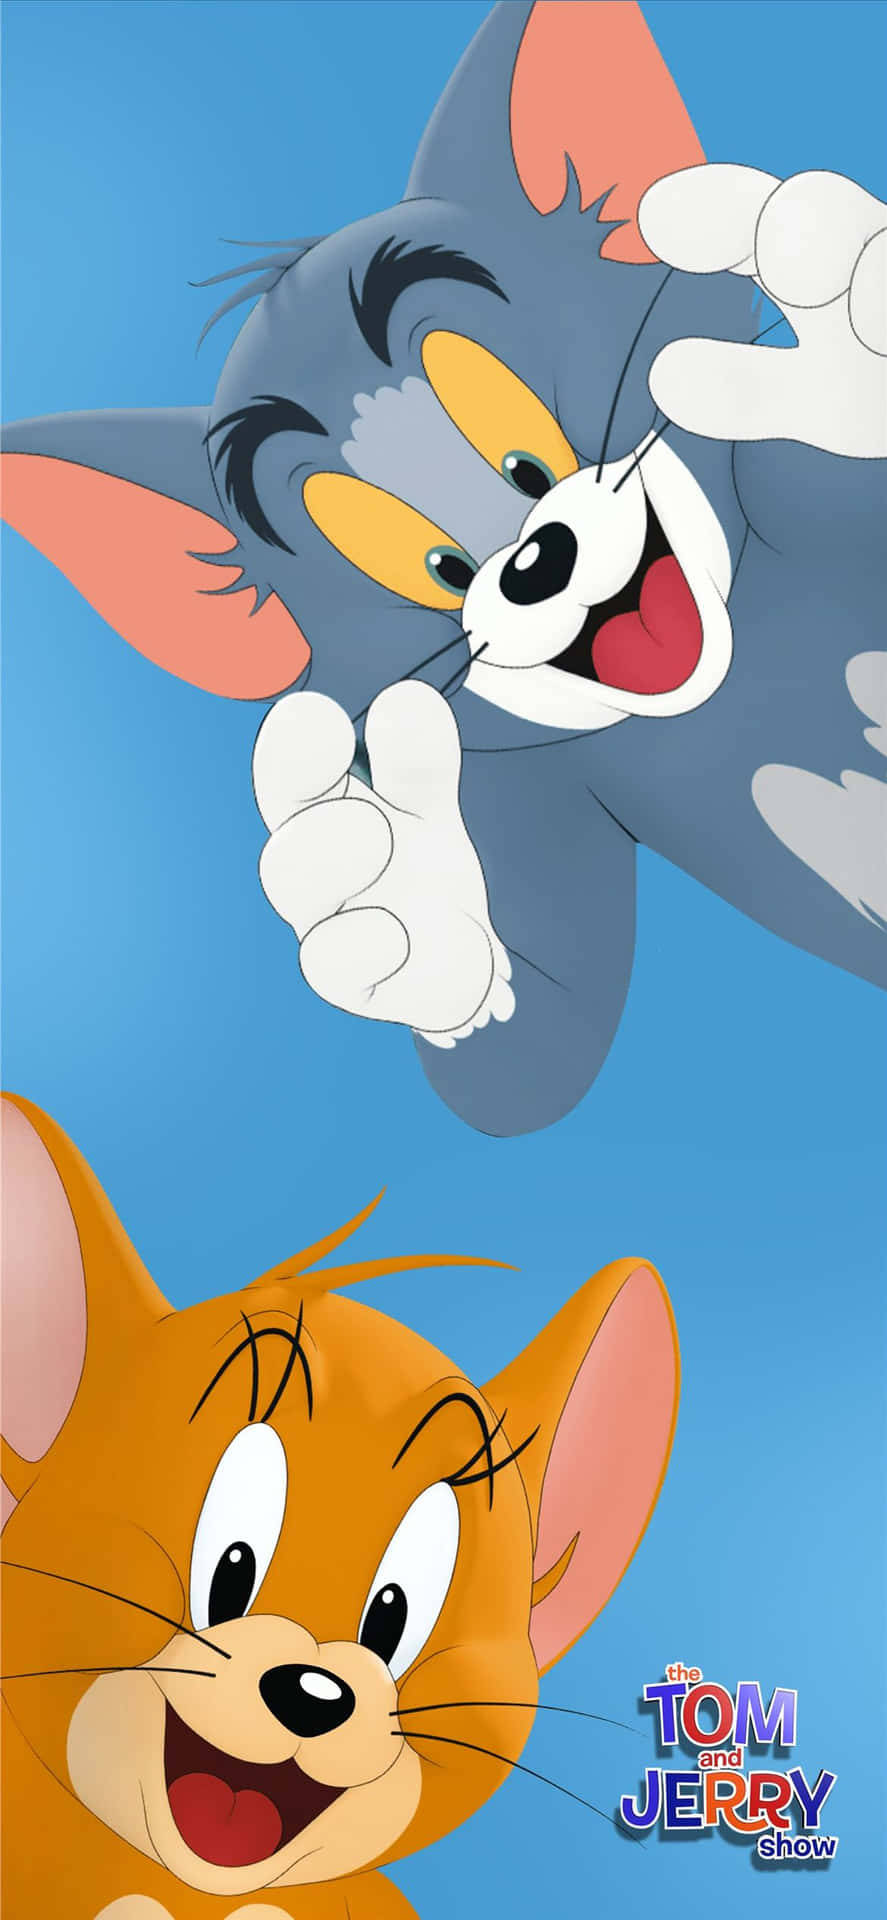 Tom And Jerry, The Classic Animated Duo